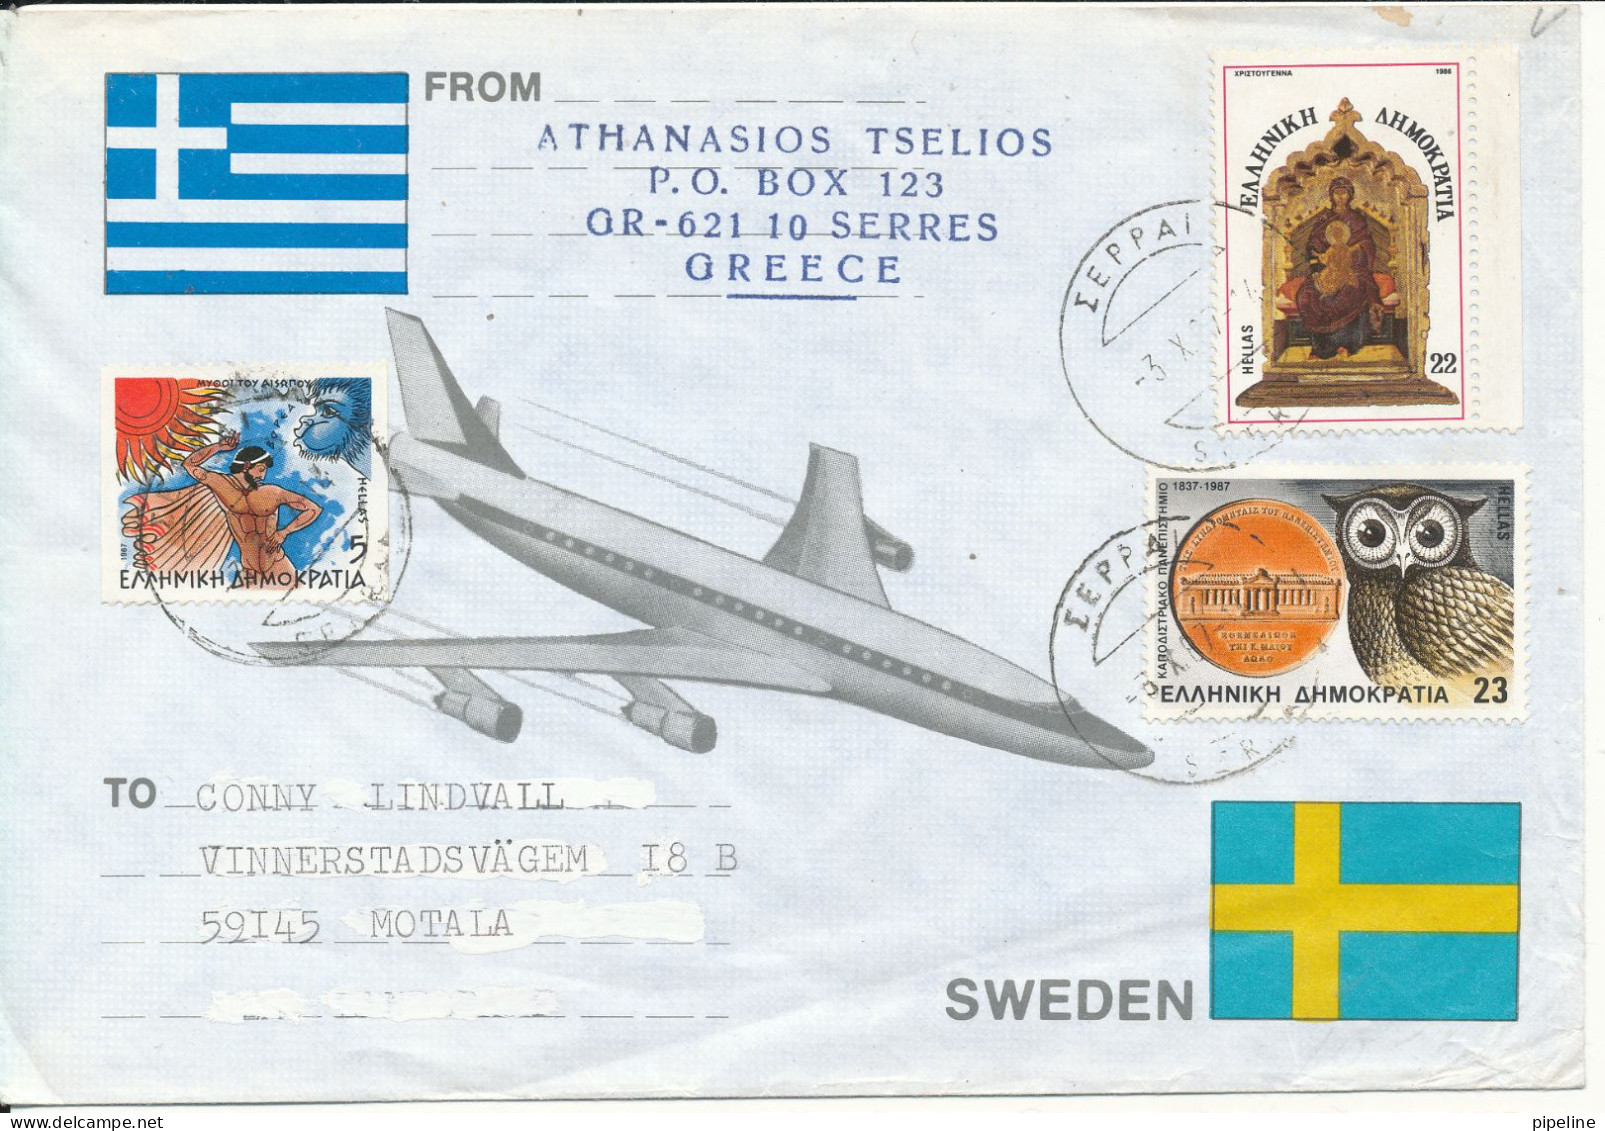 Greece Air Mail Cover Sent To Sweden 3-10-1987 See The BASKETBALL Label On The Backside Of The Cover - Mount Althos